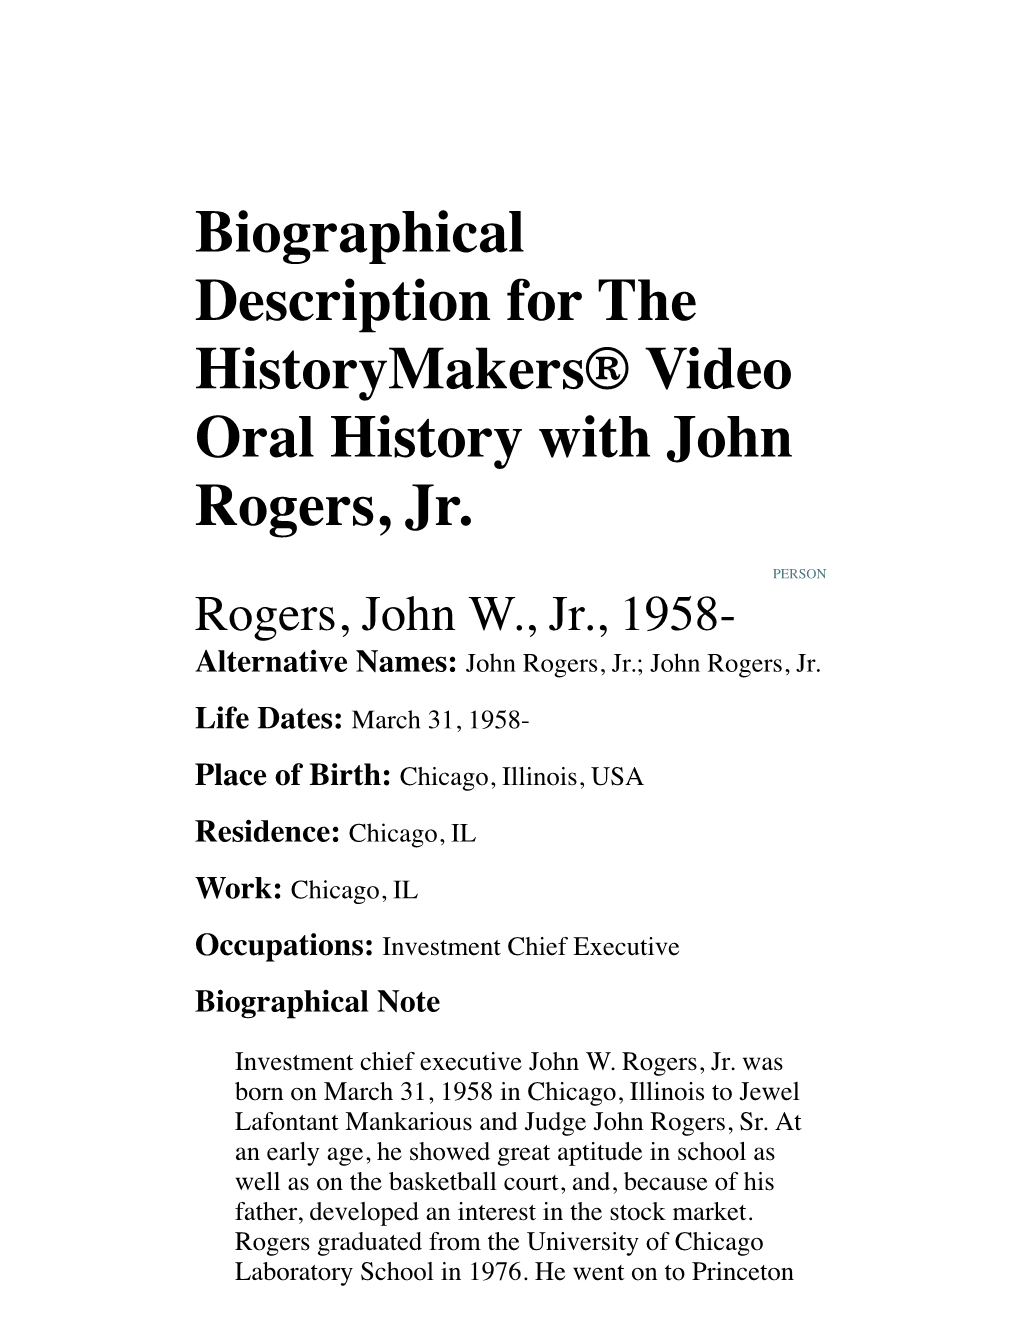 Biographical Description for the Historymakers® Video Oral History with John Rogers, Jr